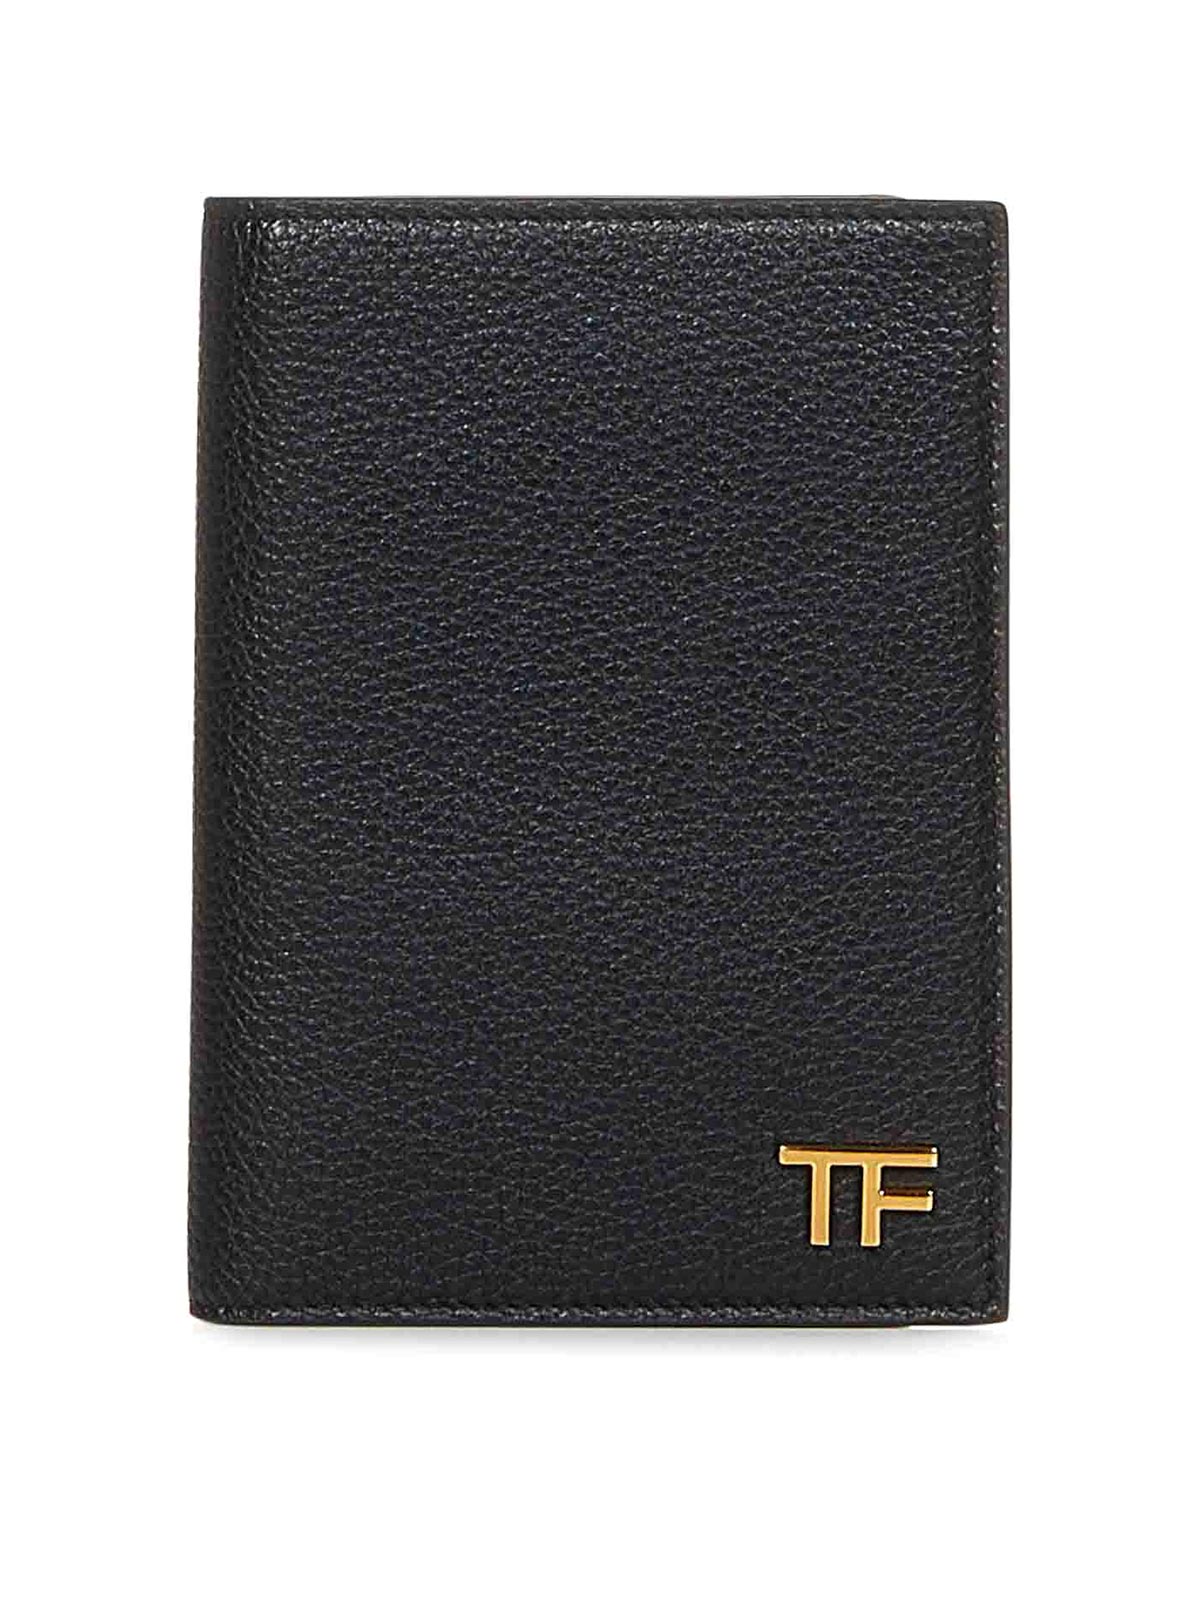 Tom Ford Grained Leather Wallet With Tf Monogram In Black